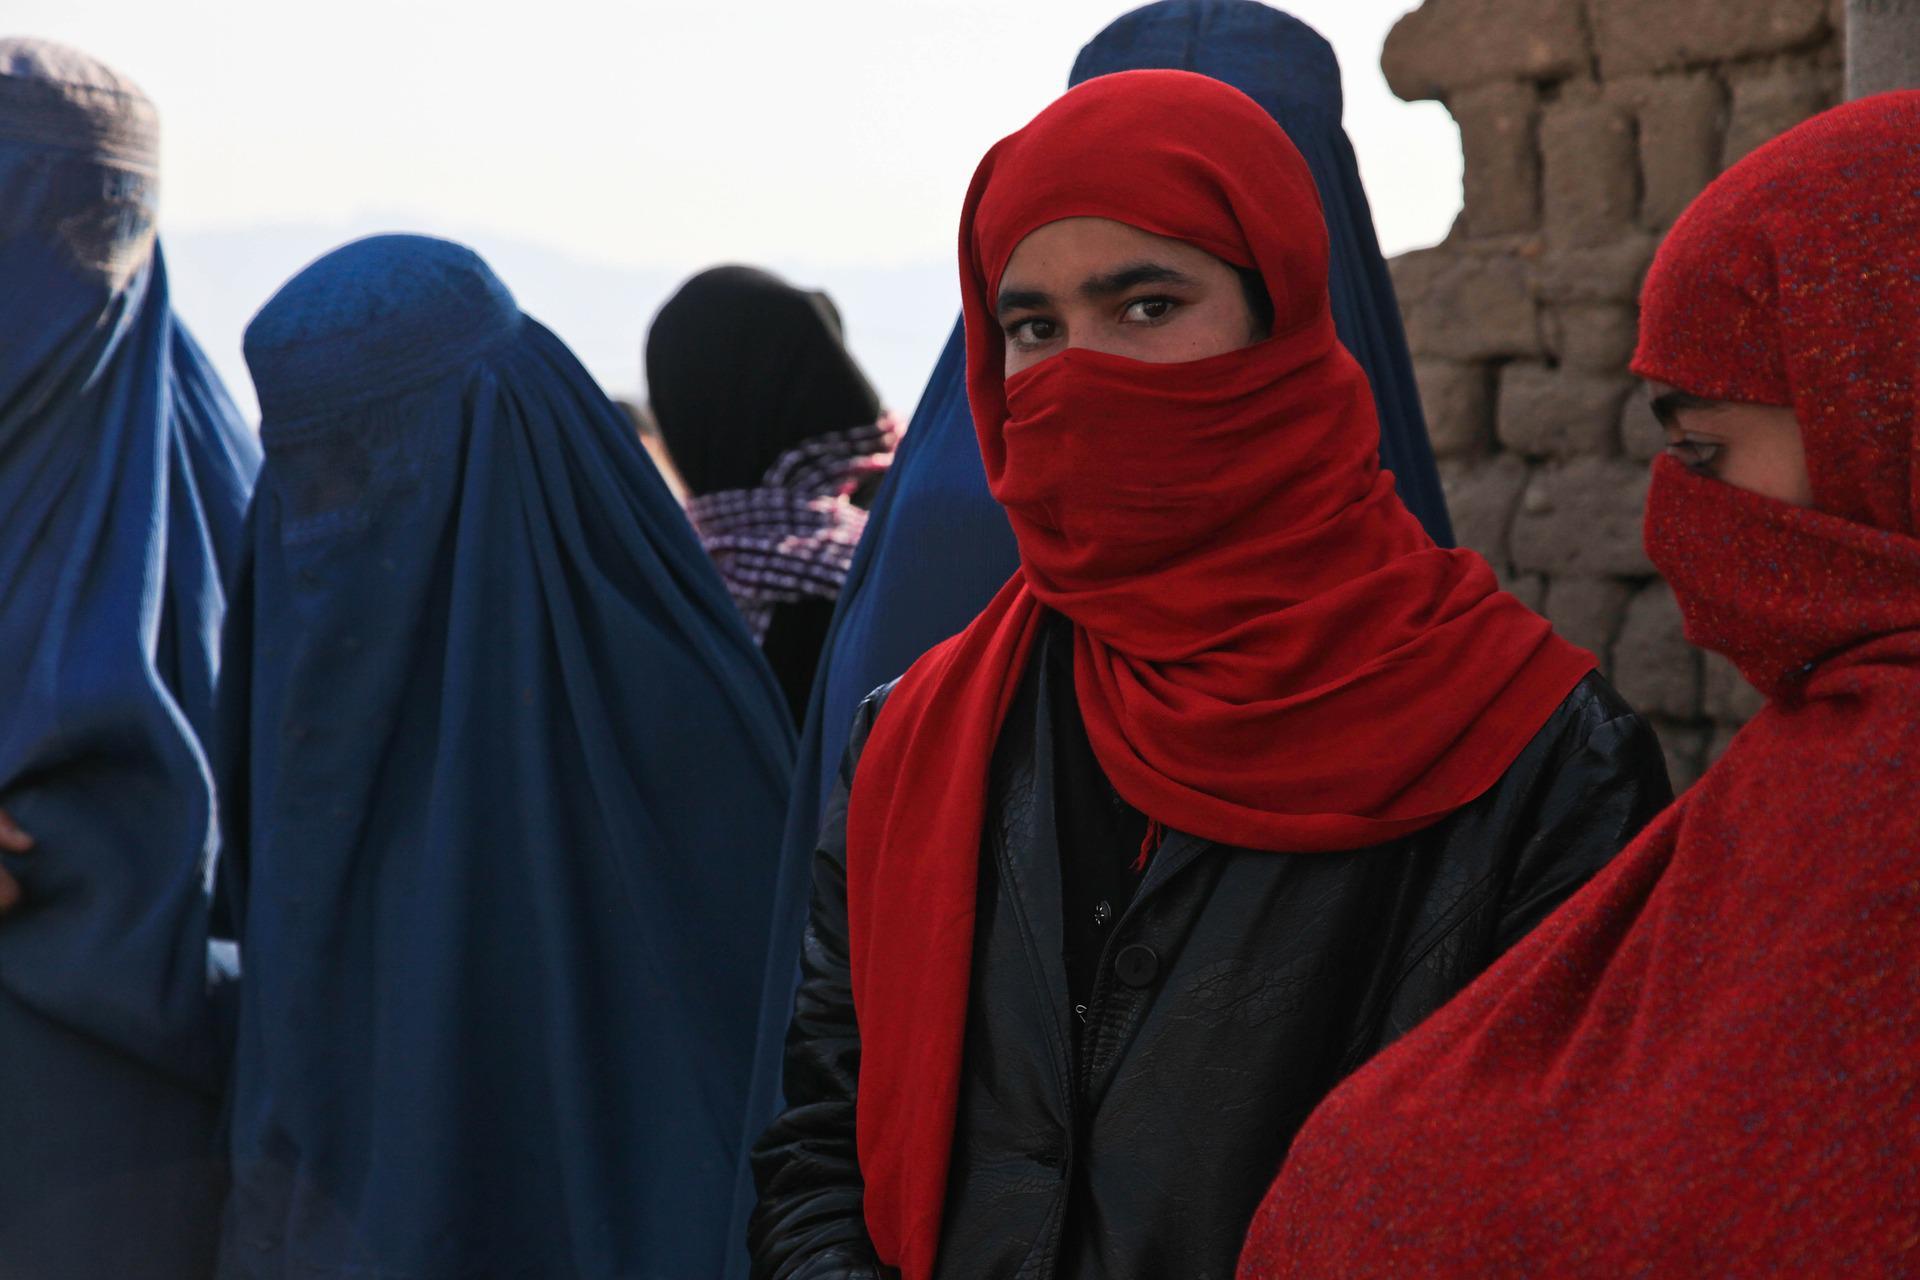 Afghan women are losing their rights overnight